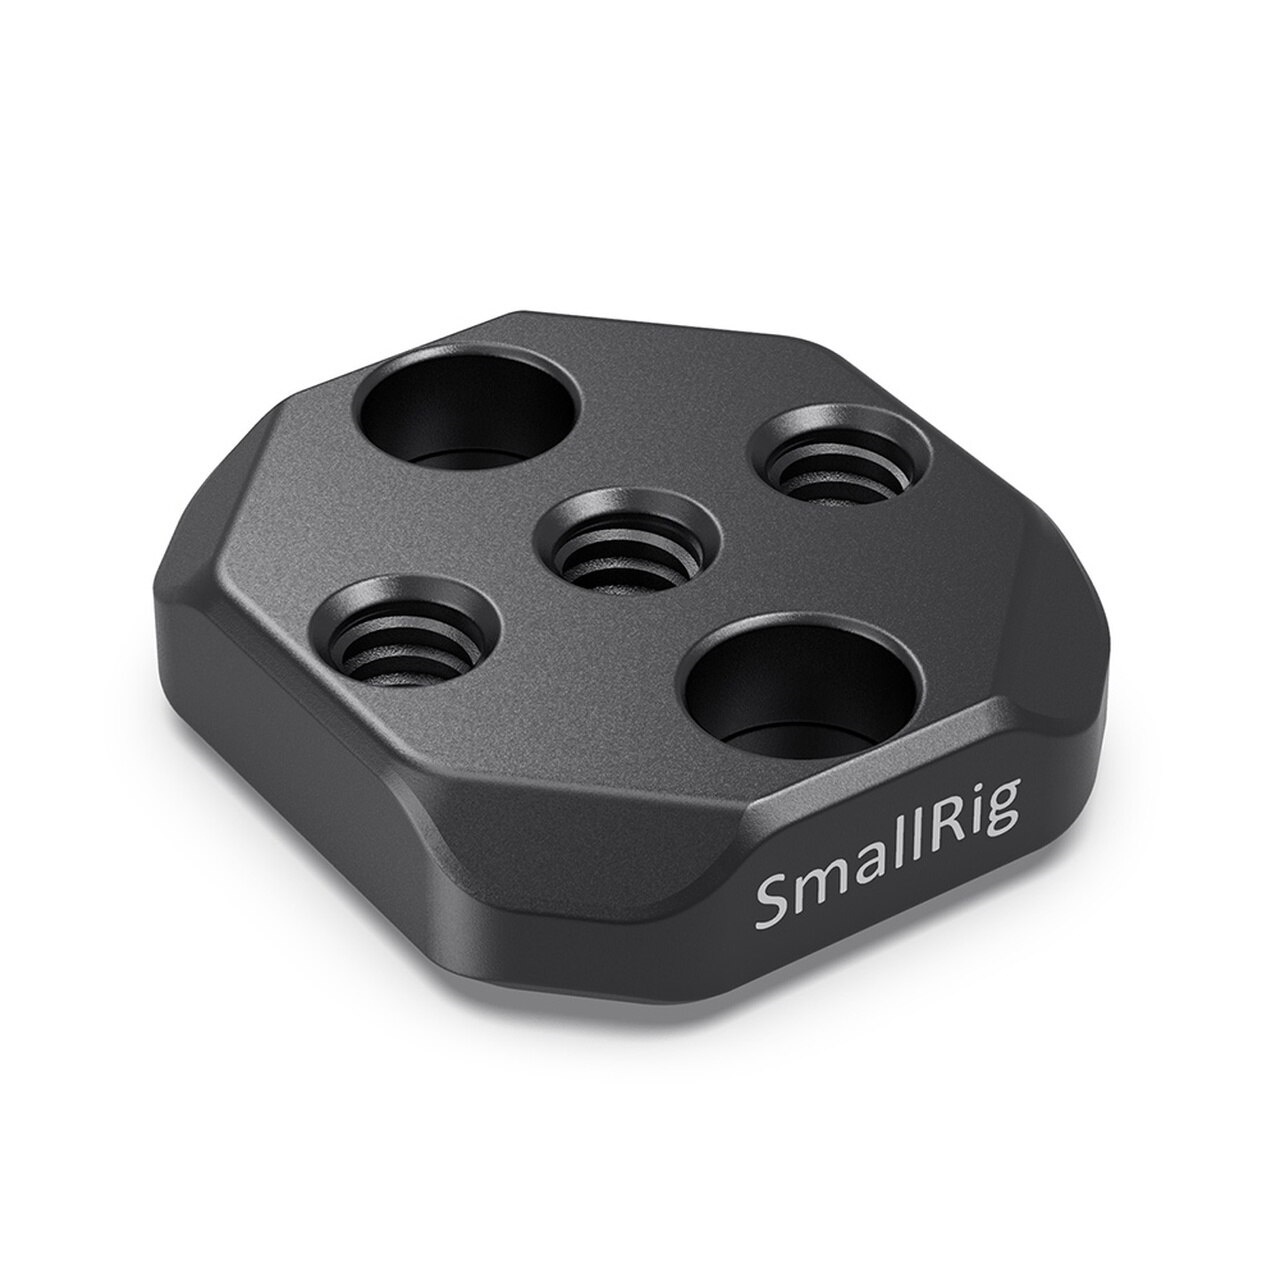 SmallRig BSS2710 Mounting Plate for DJI Ronin-S and Ronin-SC